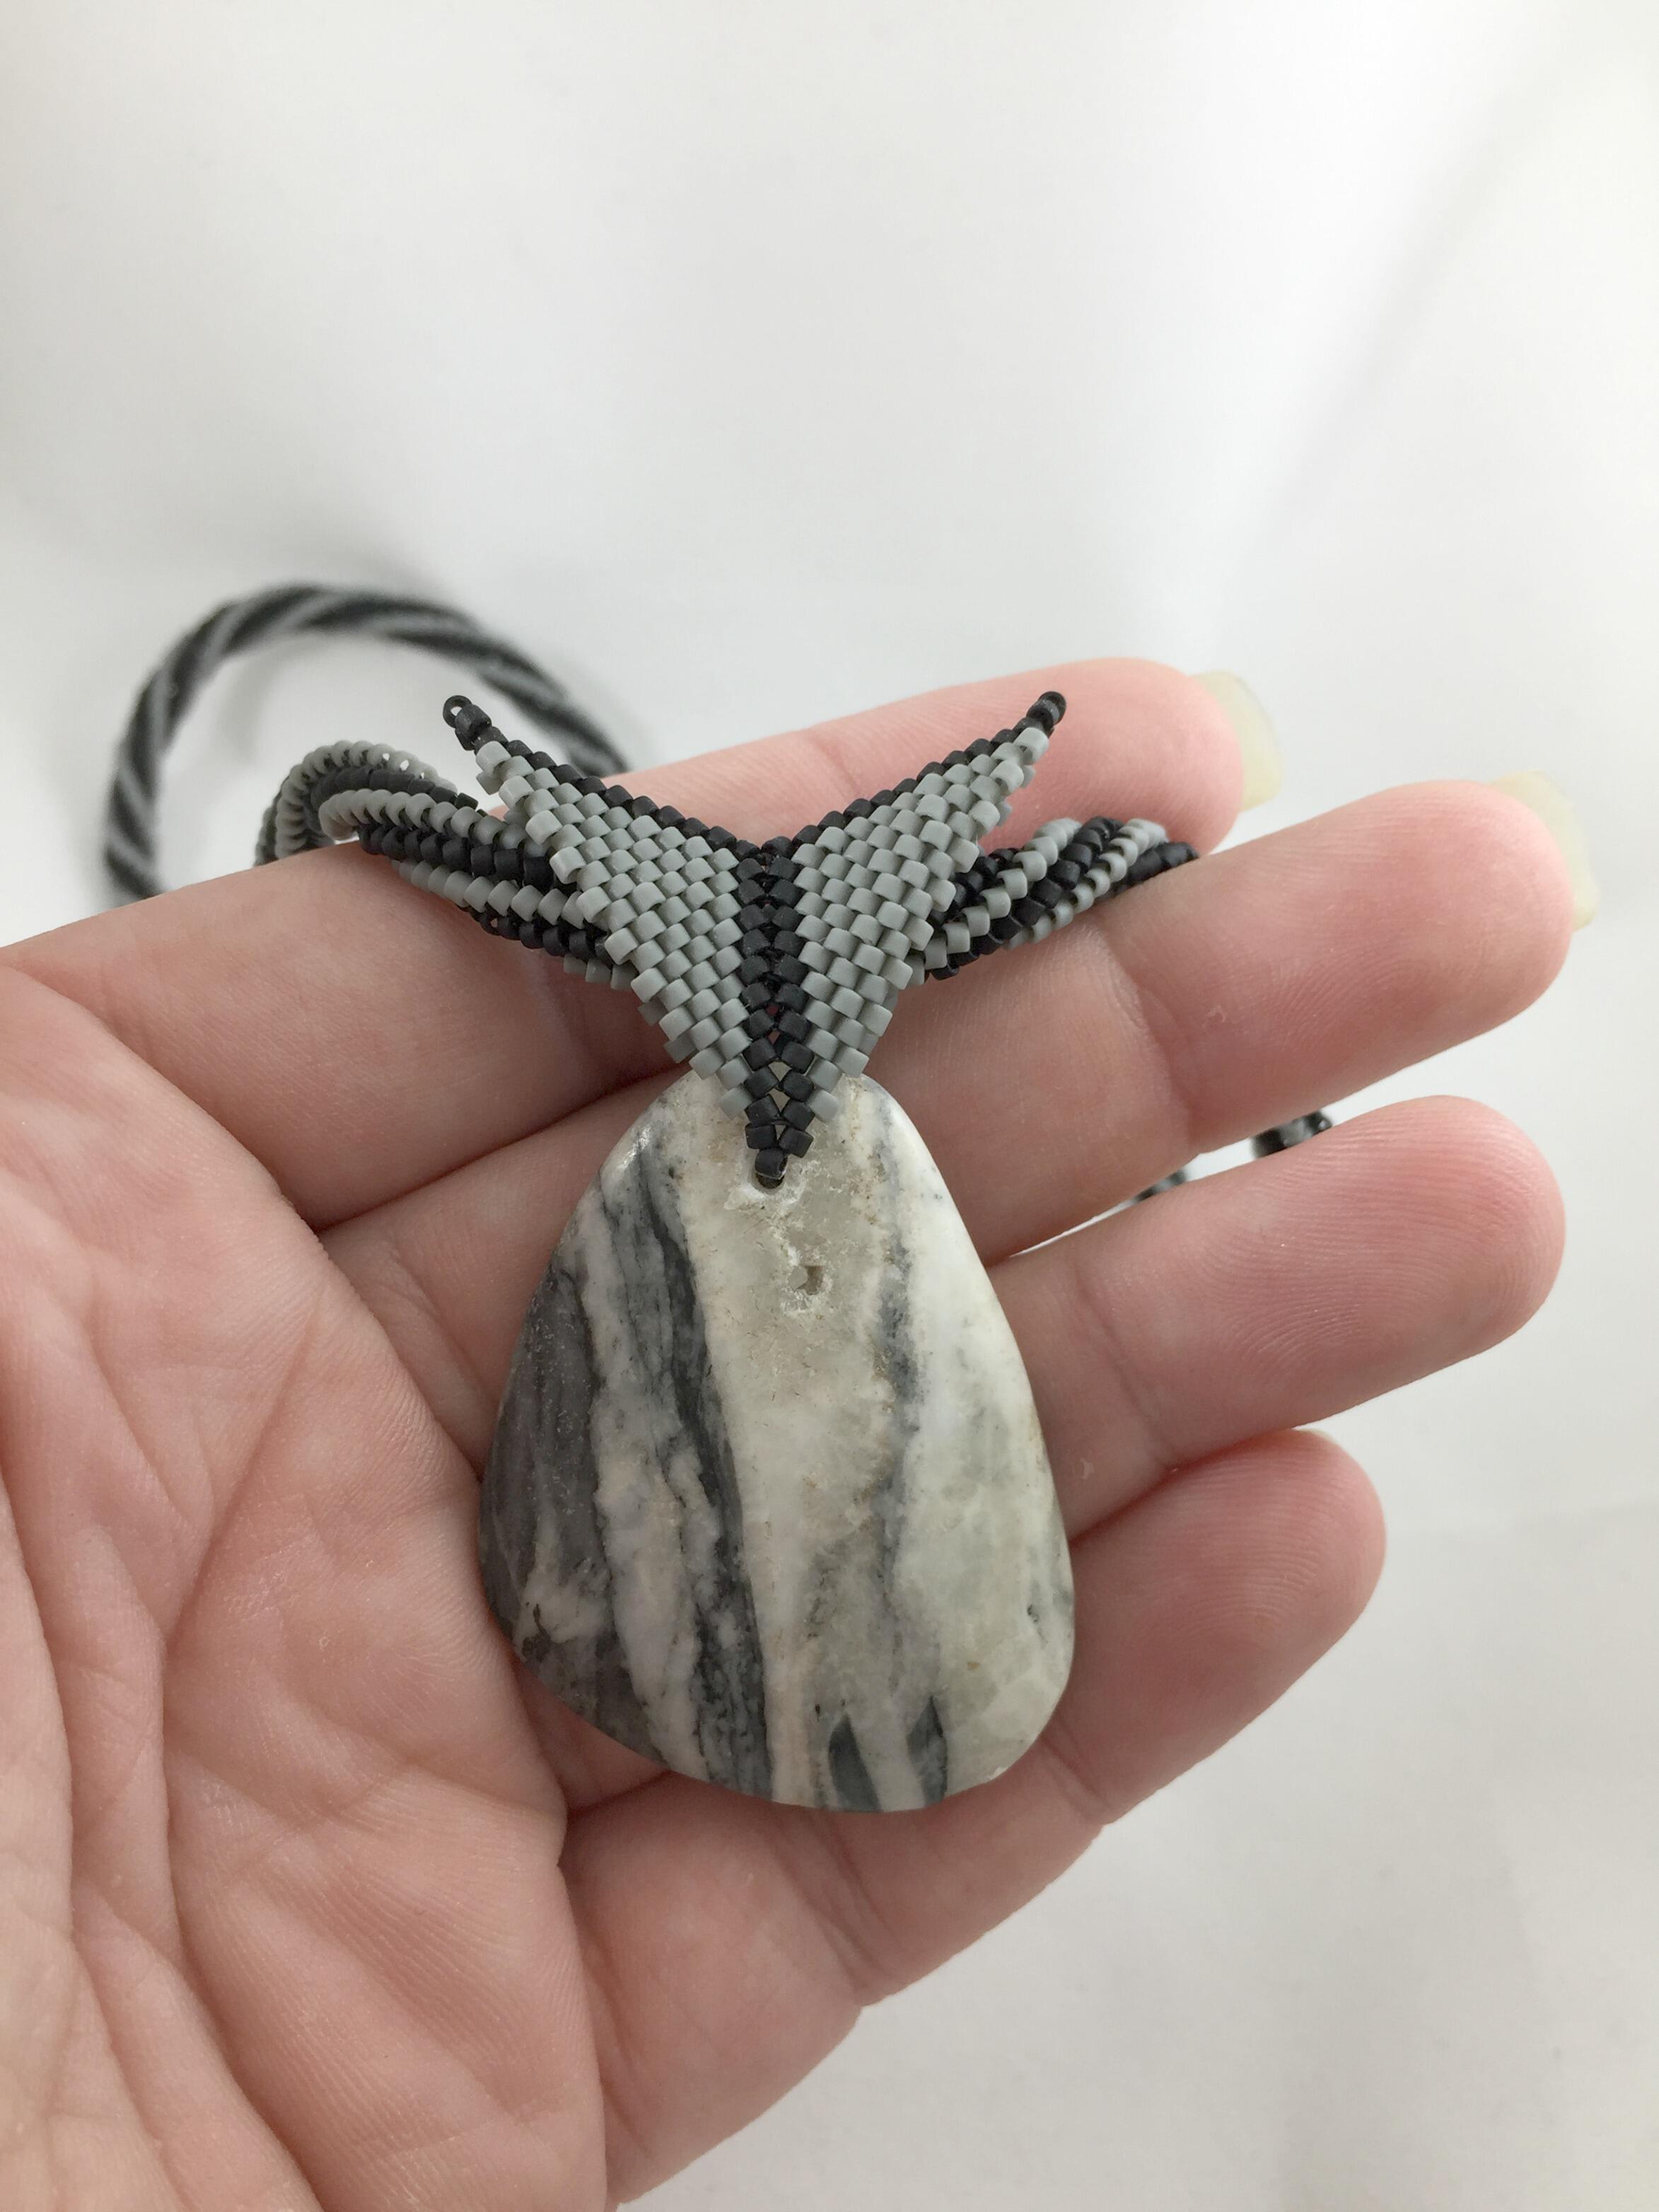 Grey and white marble pendant held in hand to show size